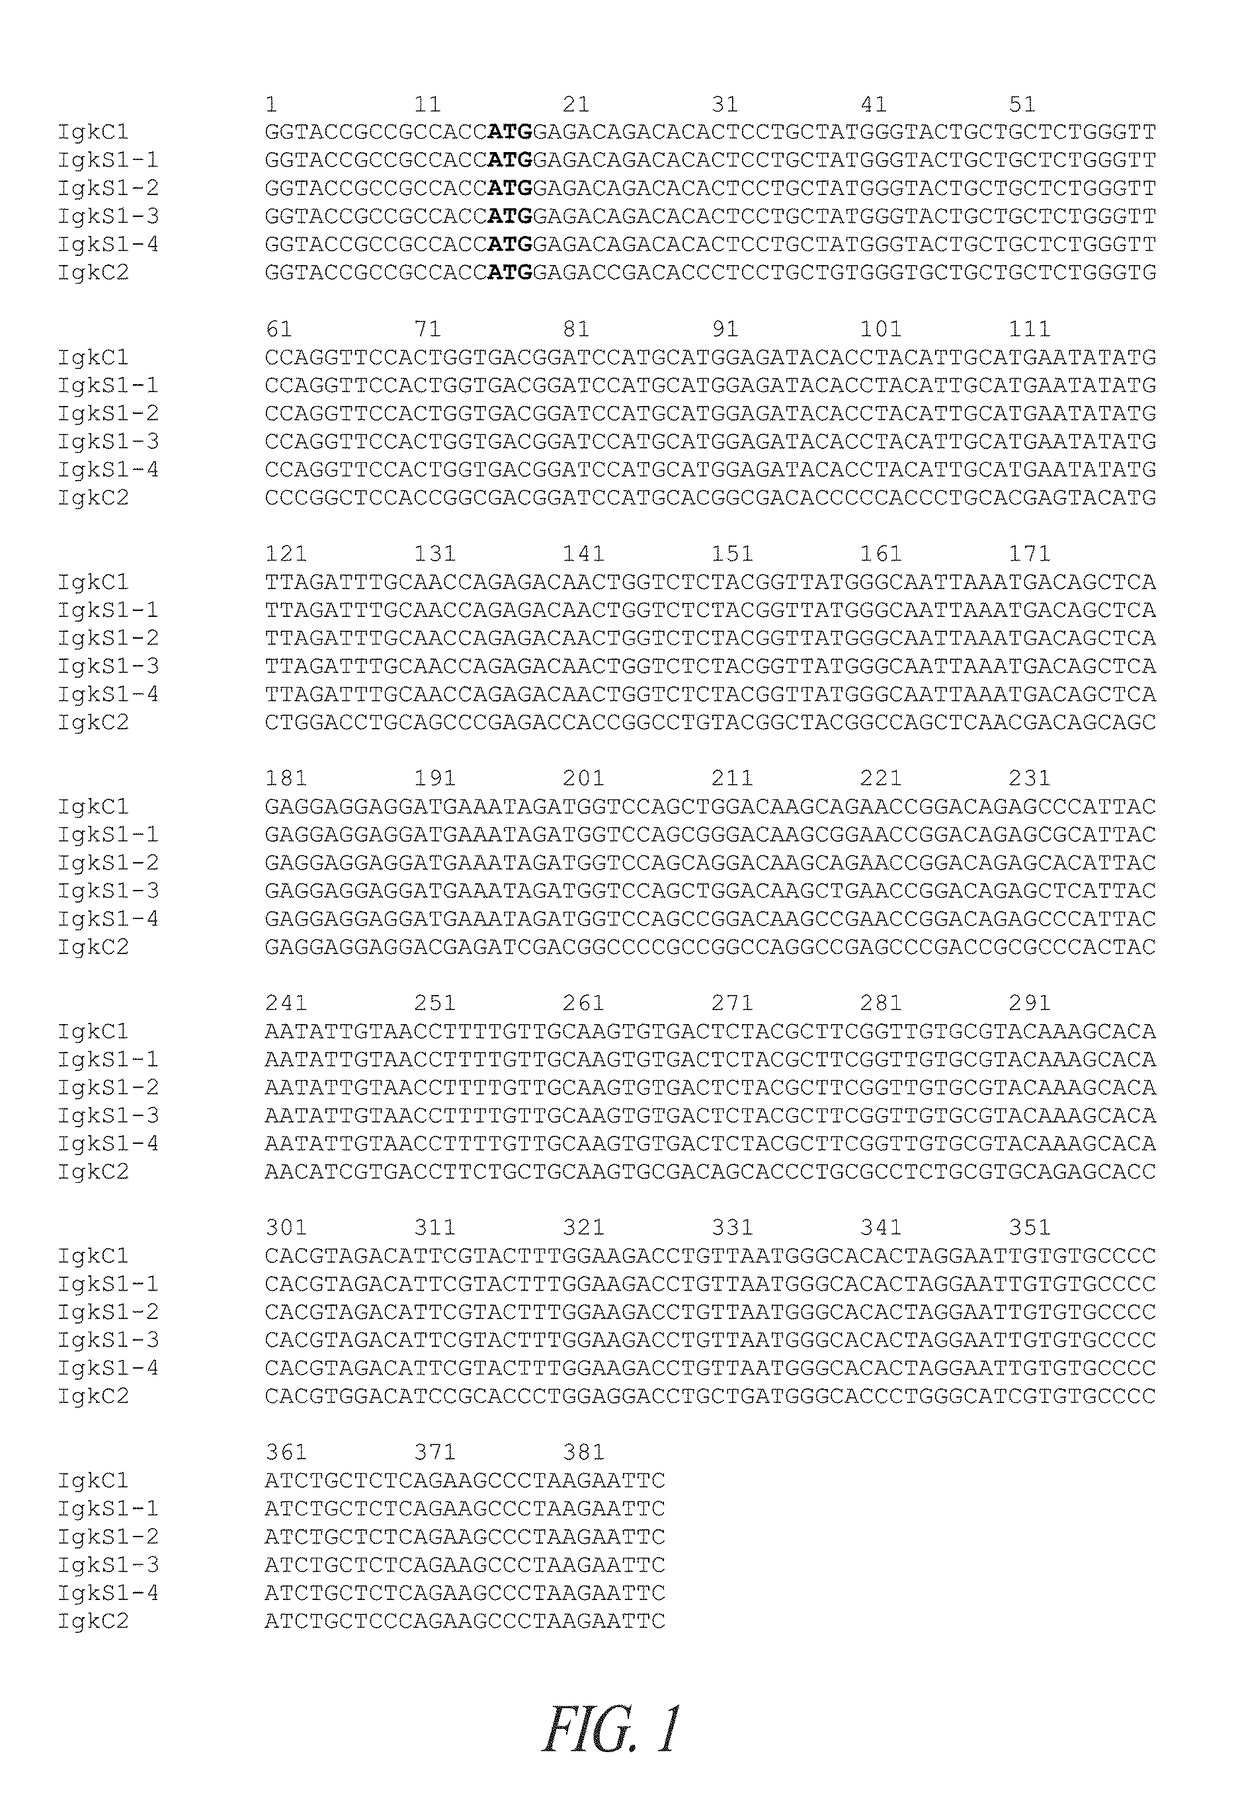 Expression system for modulating an immune response